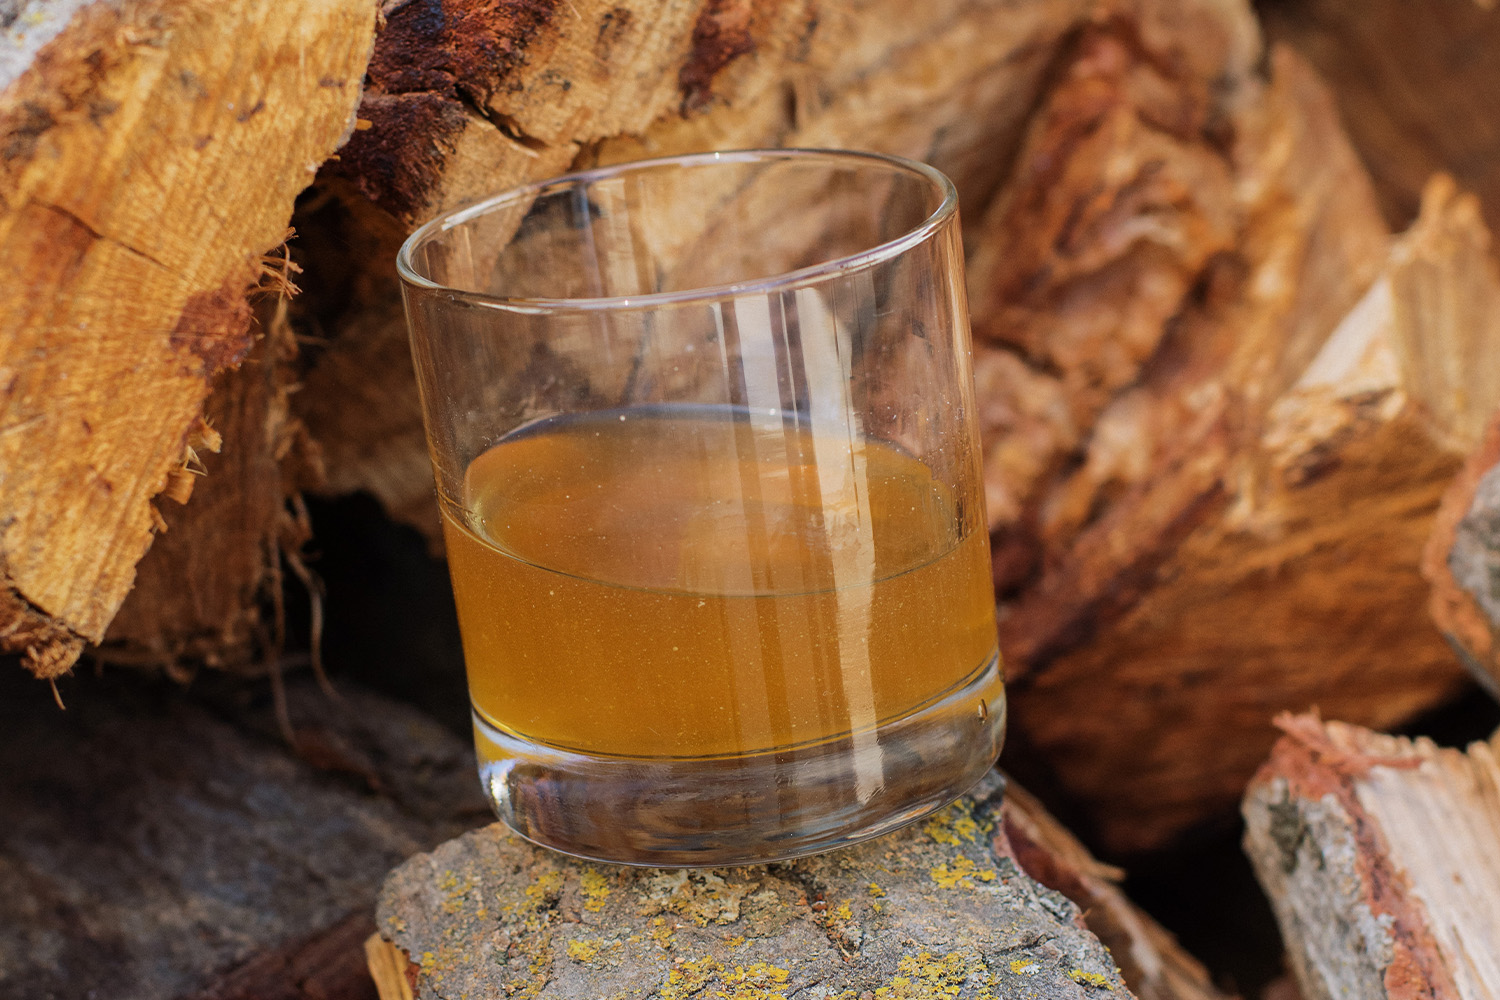 Brownish-gold-colored drink in a lowball glass outside